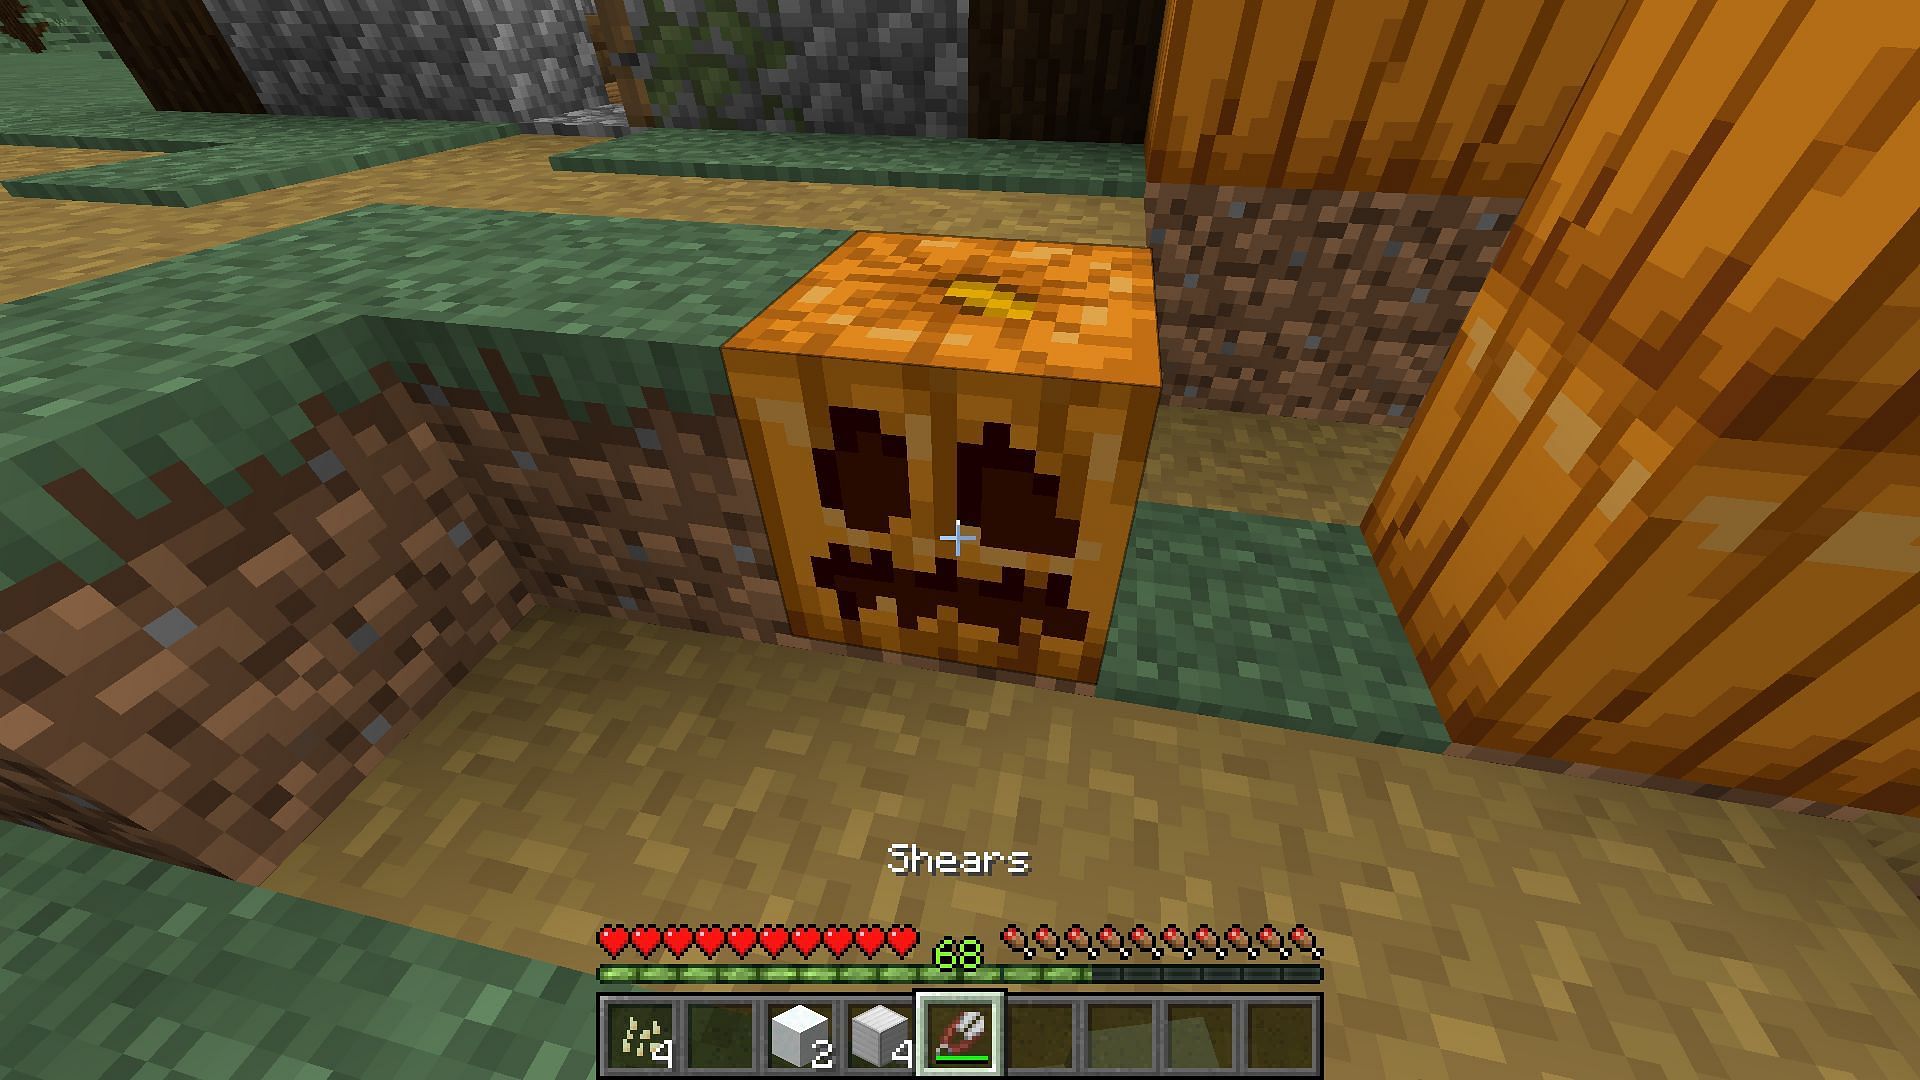 Players can wear carved pumpkins on their heads to make Enderman passive in the Minecraft End realm (Image via Mojang)